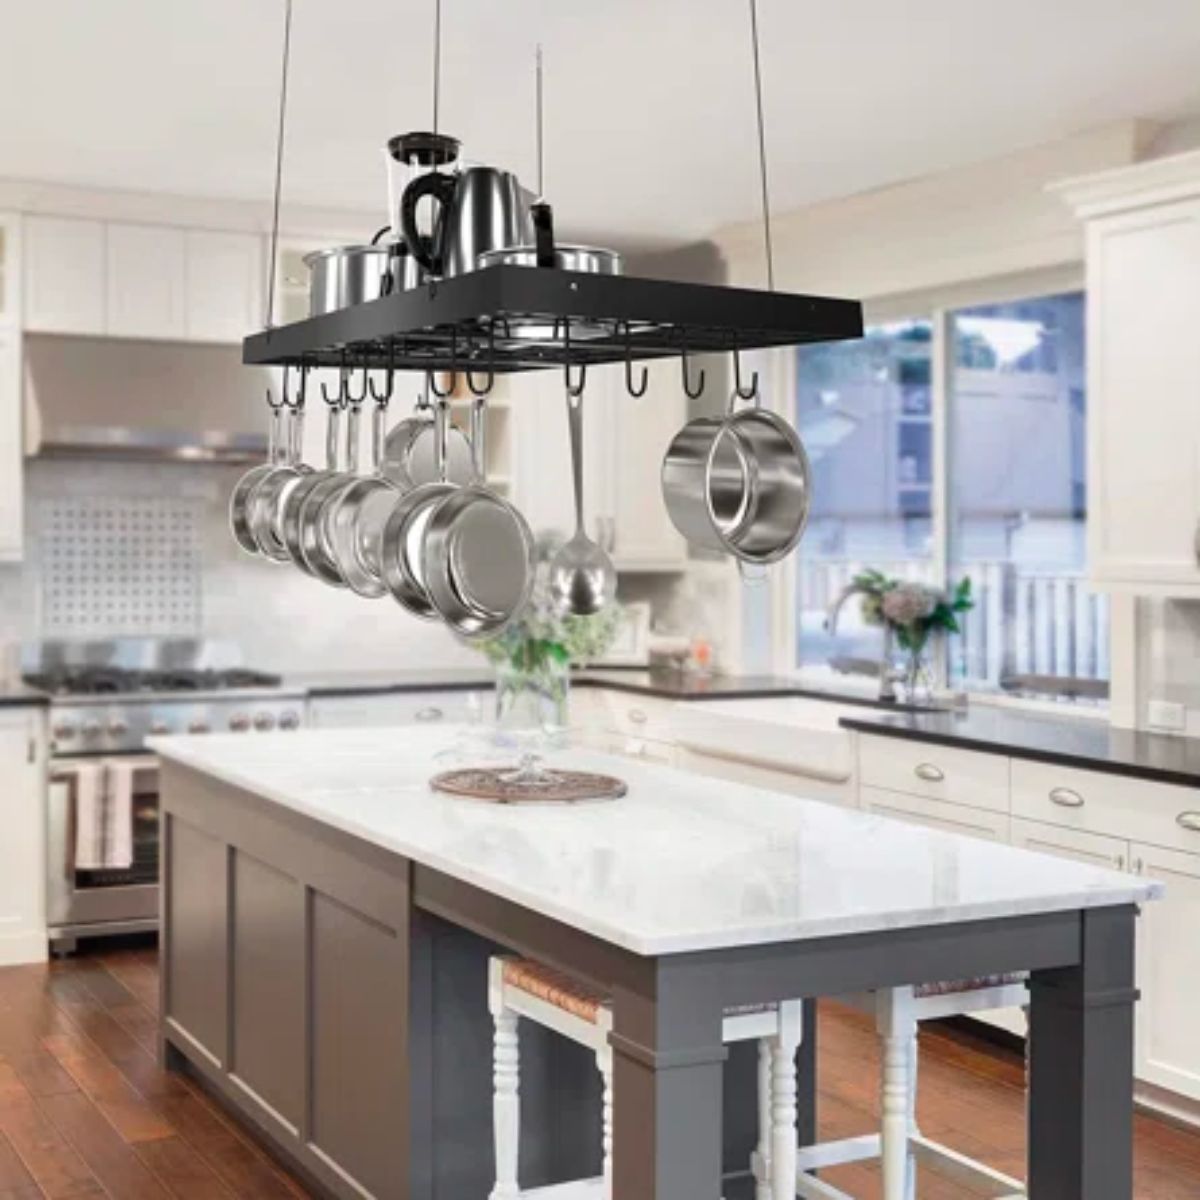 pots and pans hanging overhead of a kitchen island